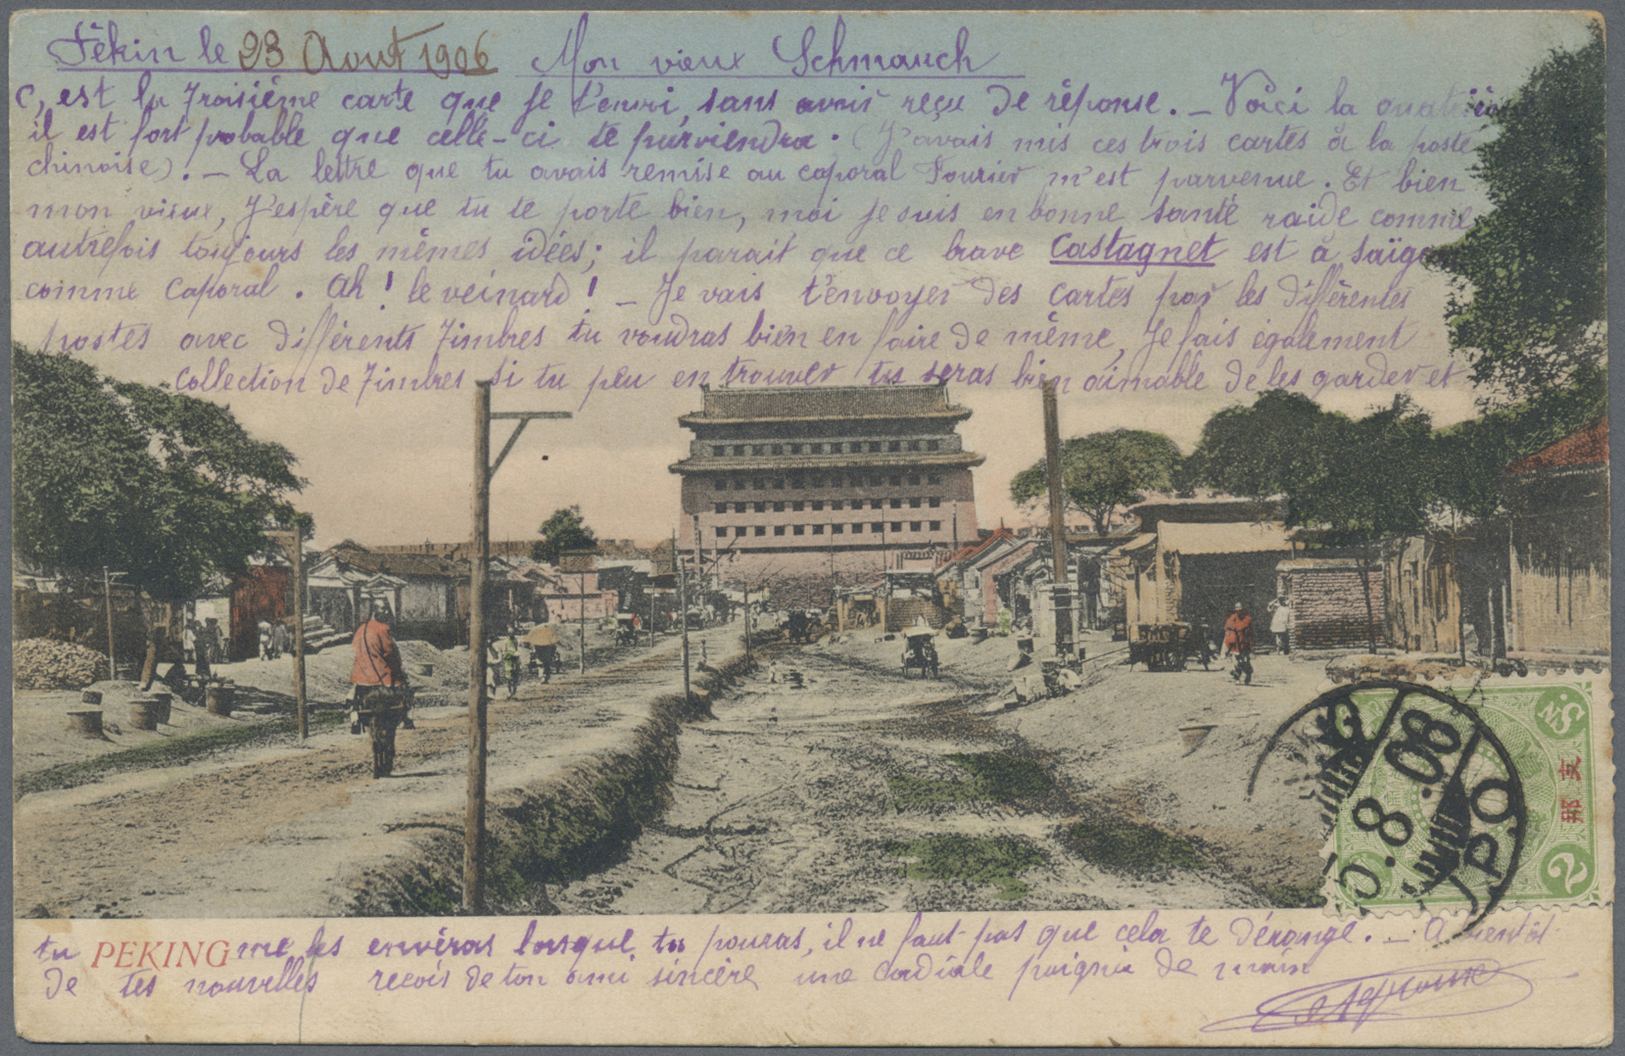 Br Japanische Post In China: 1906. Picture Post Card Of 'Peking' Addressed To The '16th Regiment, Tien-Tsin' Bearing Jap - 1943-45 Shanghai & Nanjing